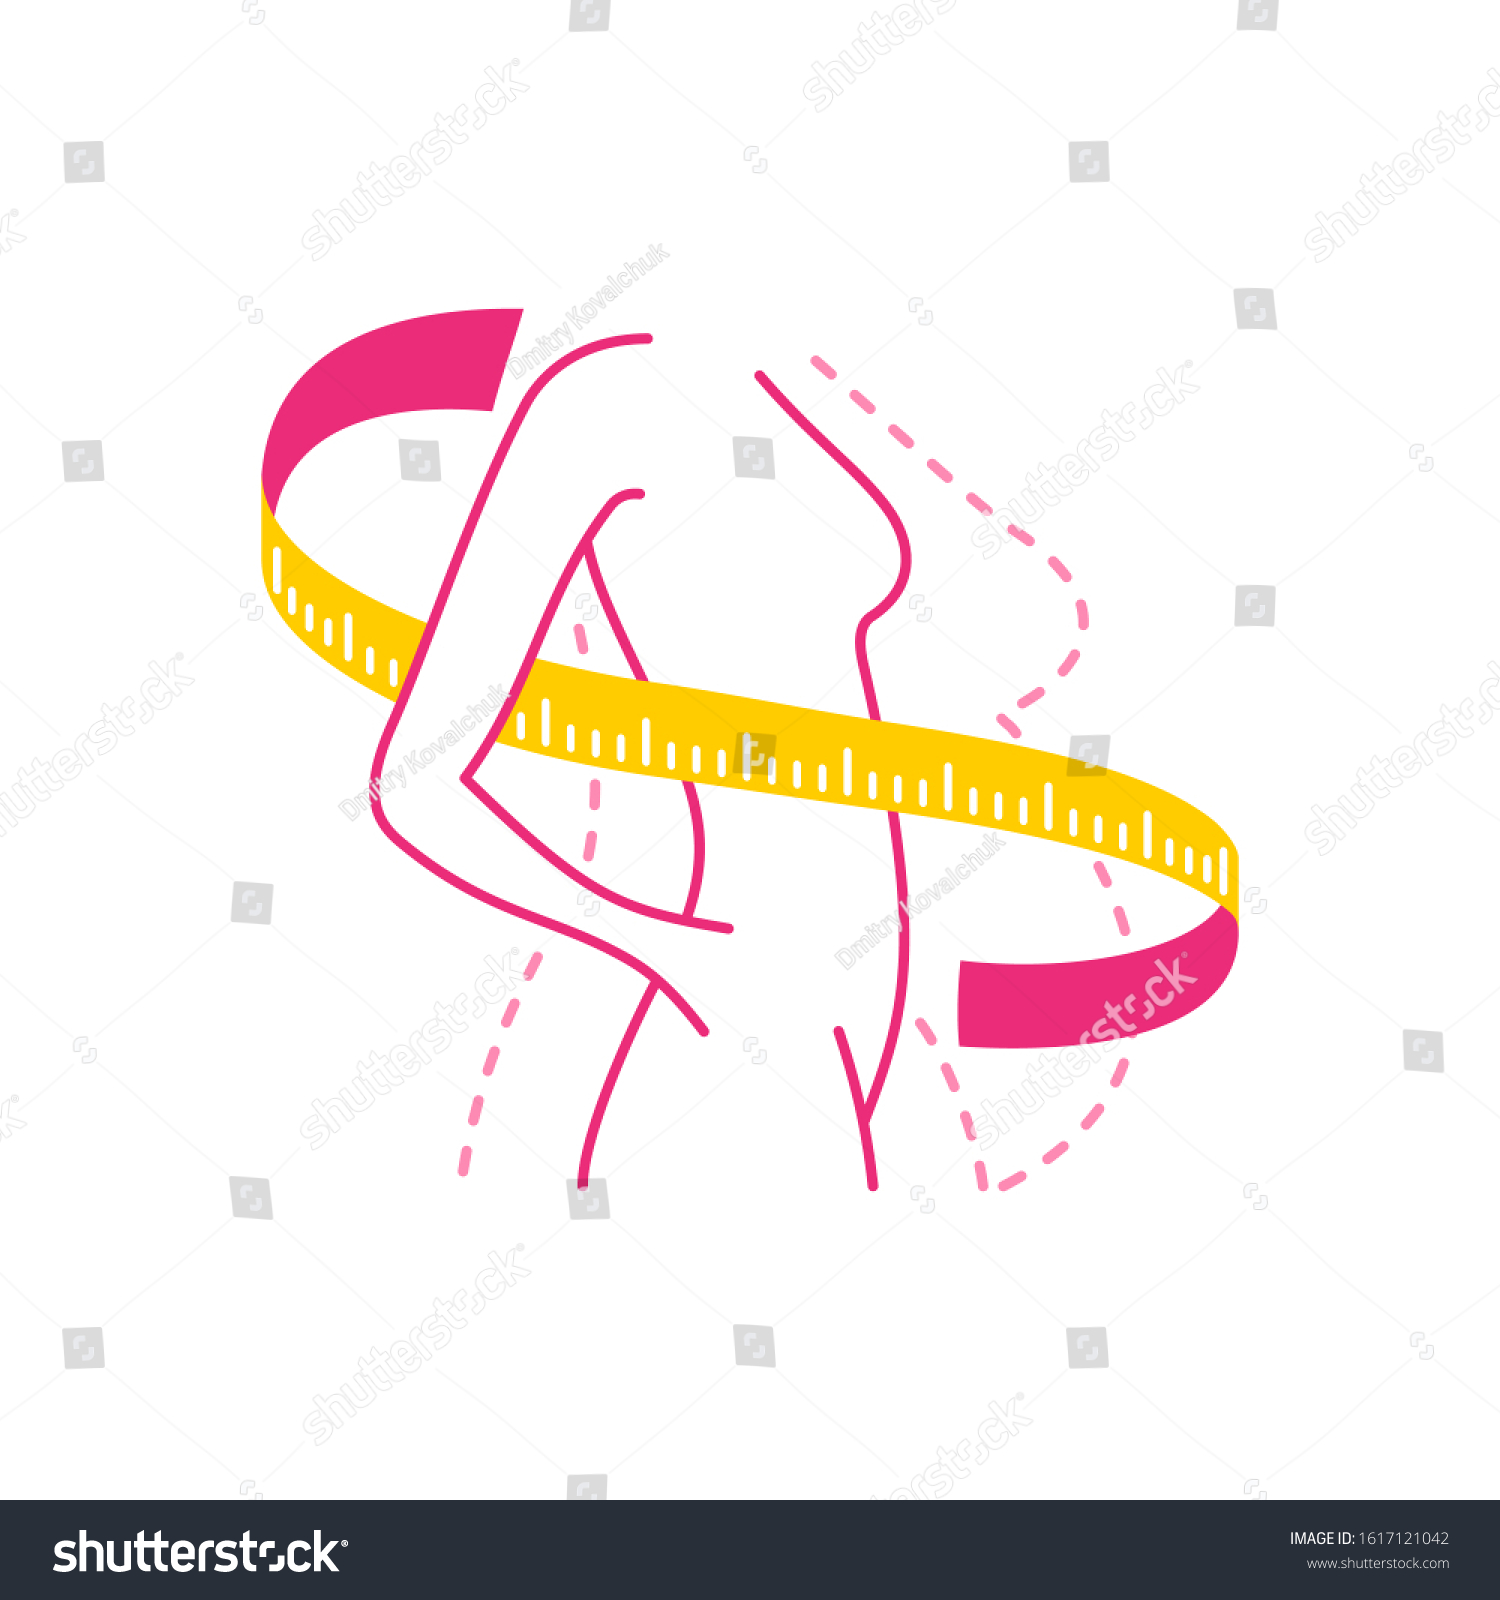 SVG of Weight loss program logo (isolated icon) - female silhouette (fat and slim figure) with measuring tape around svg